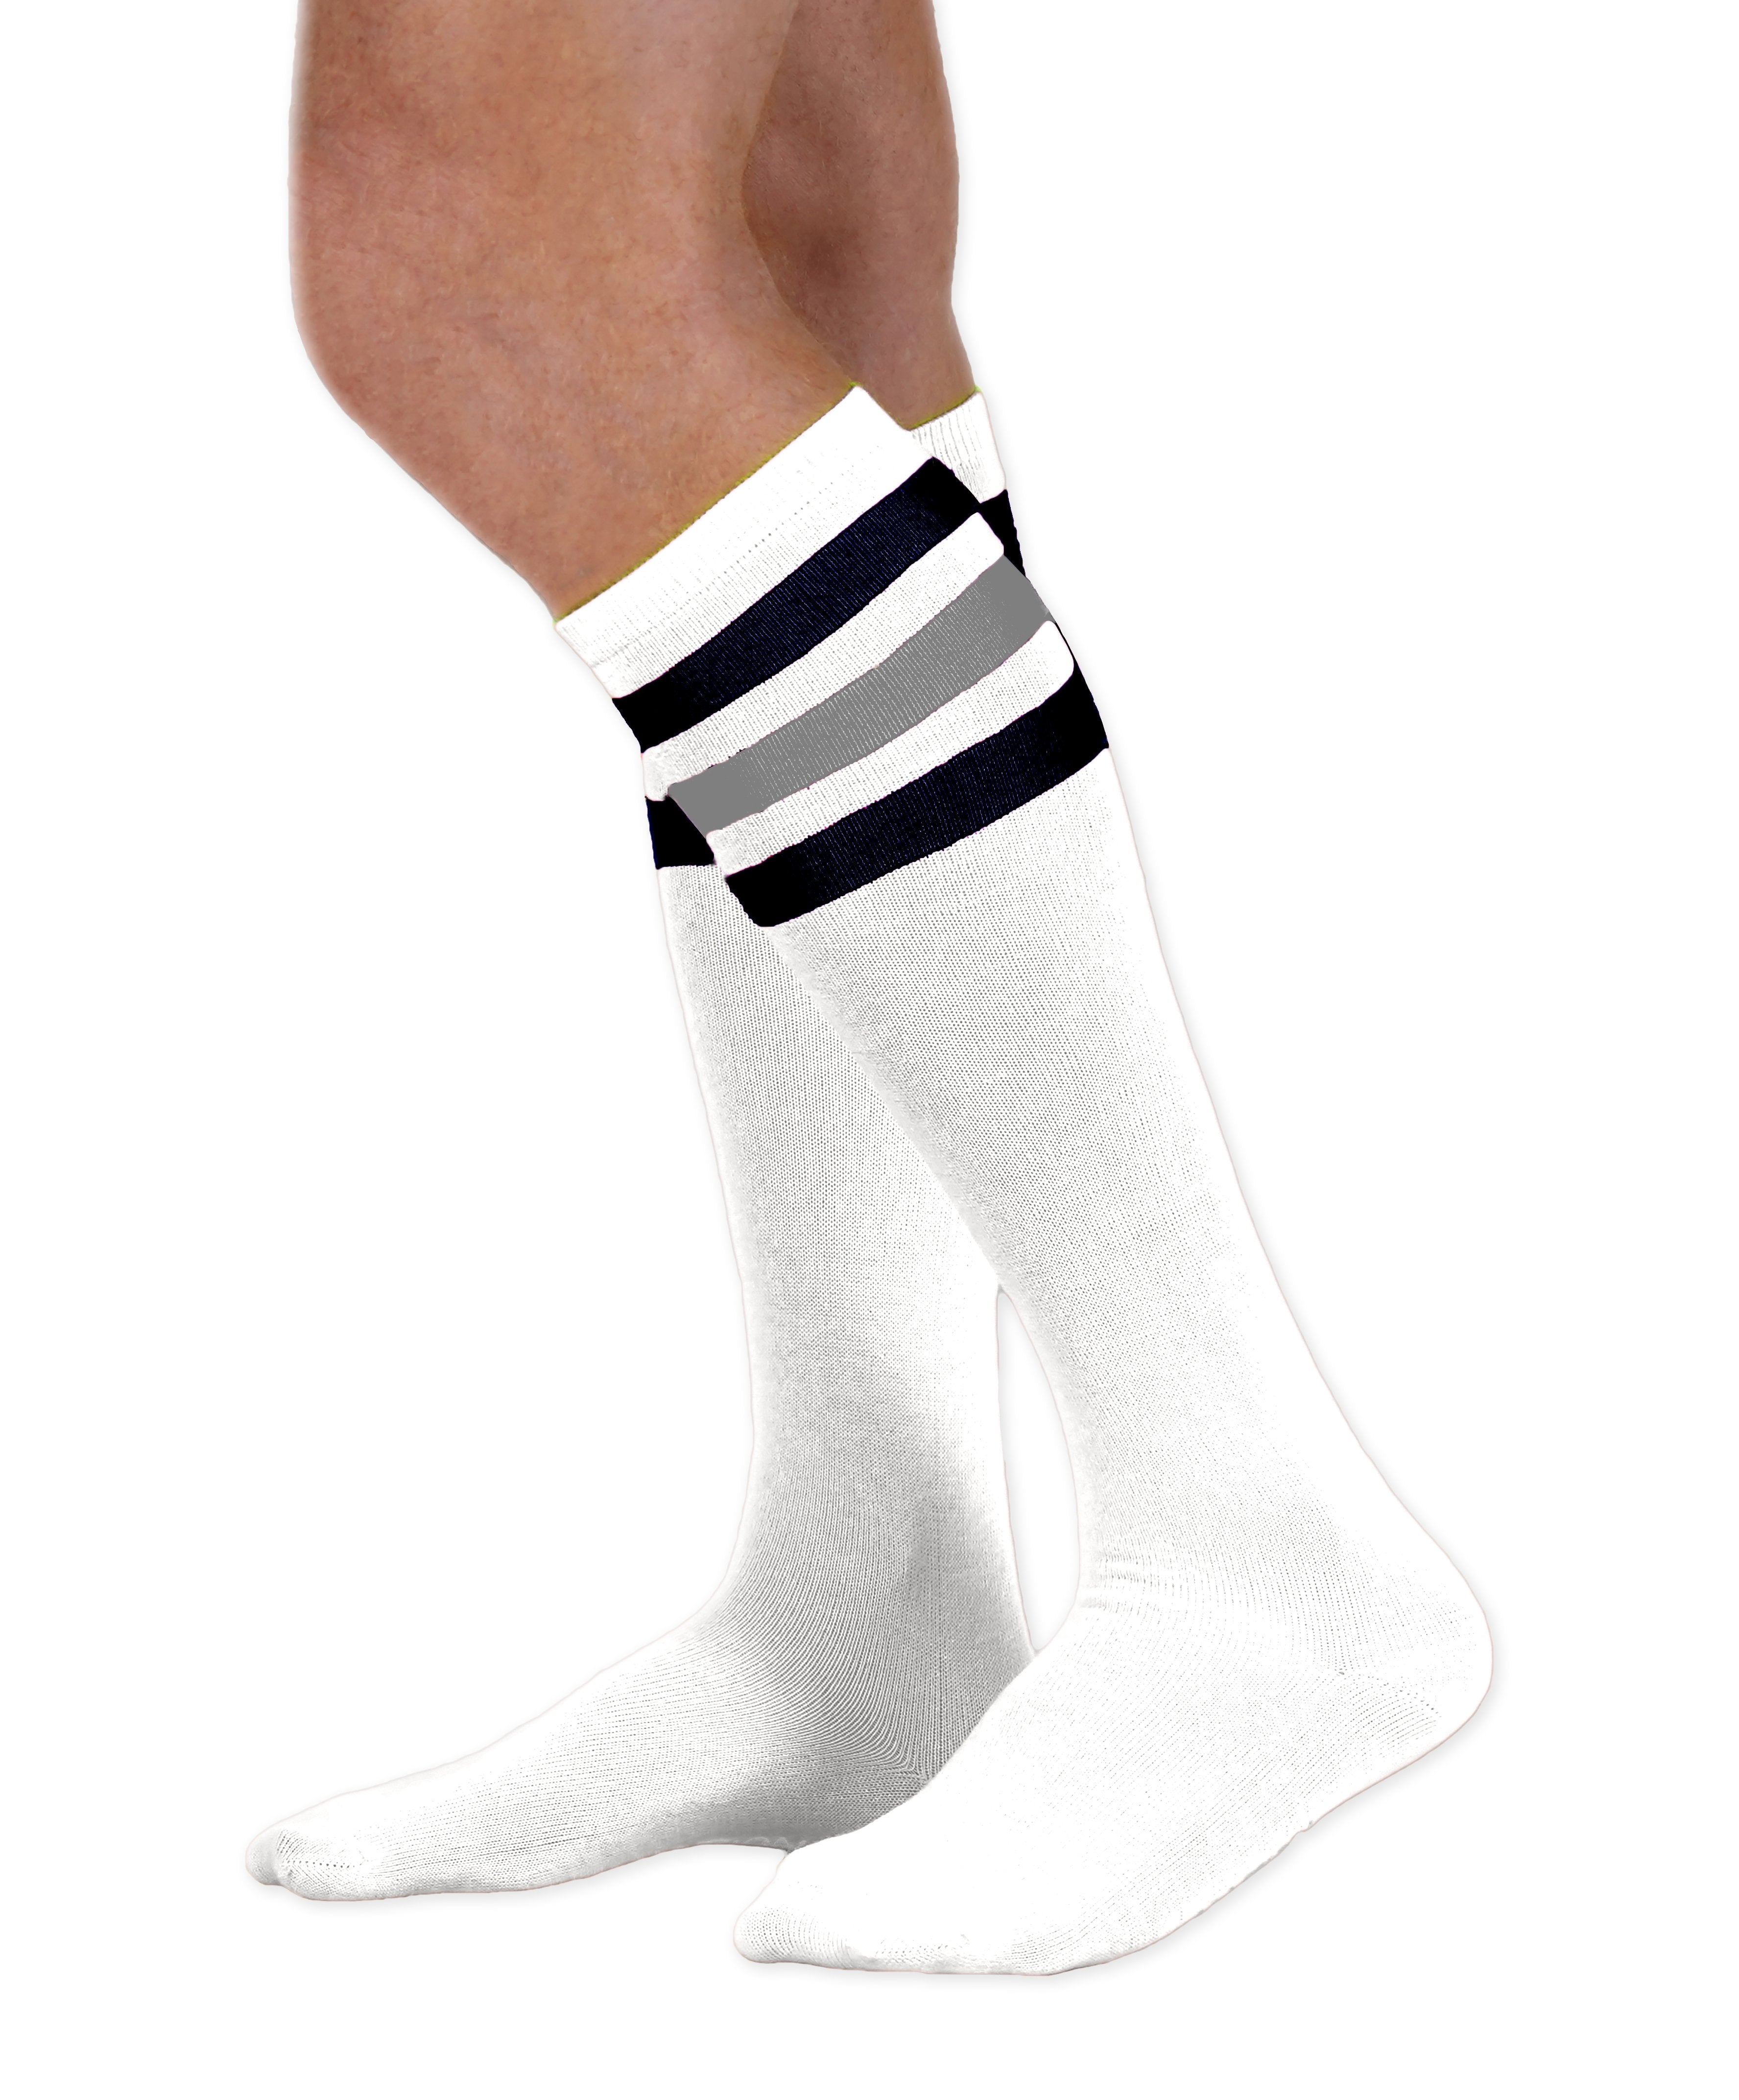 Unisex adult size white knee high tube sock with three navy blue and gray stripes